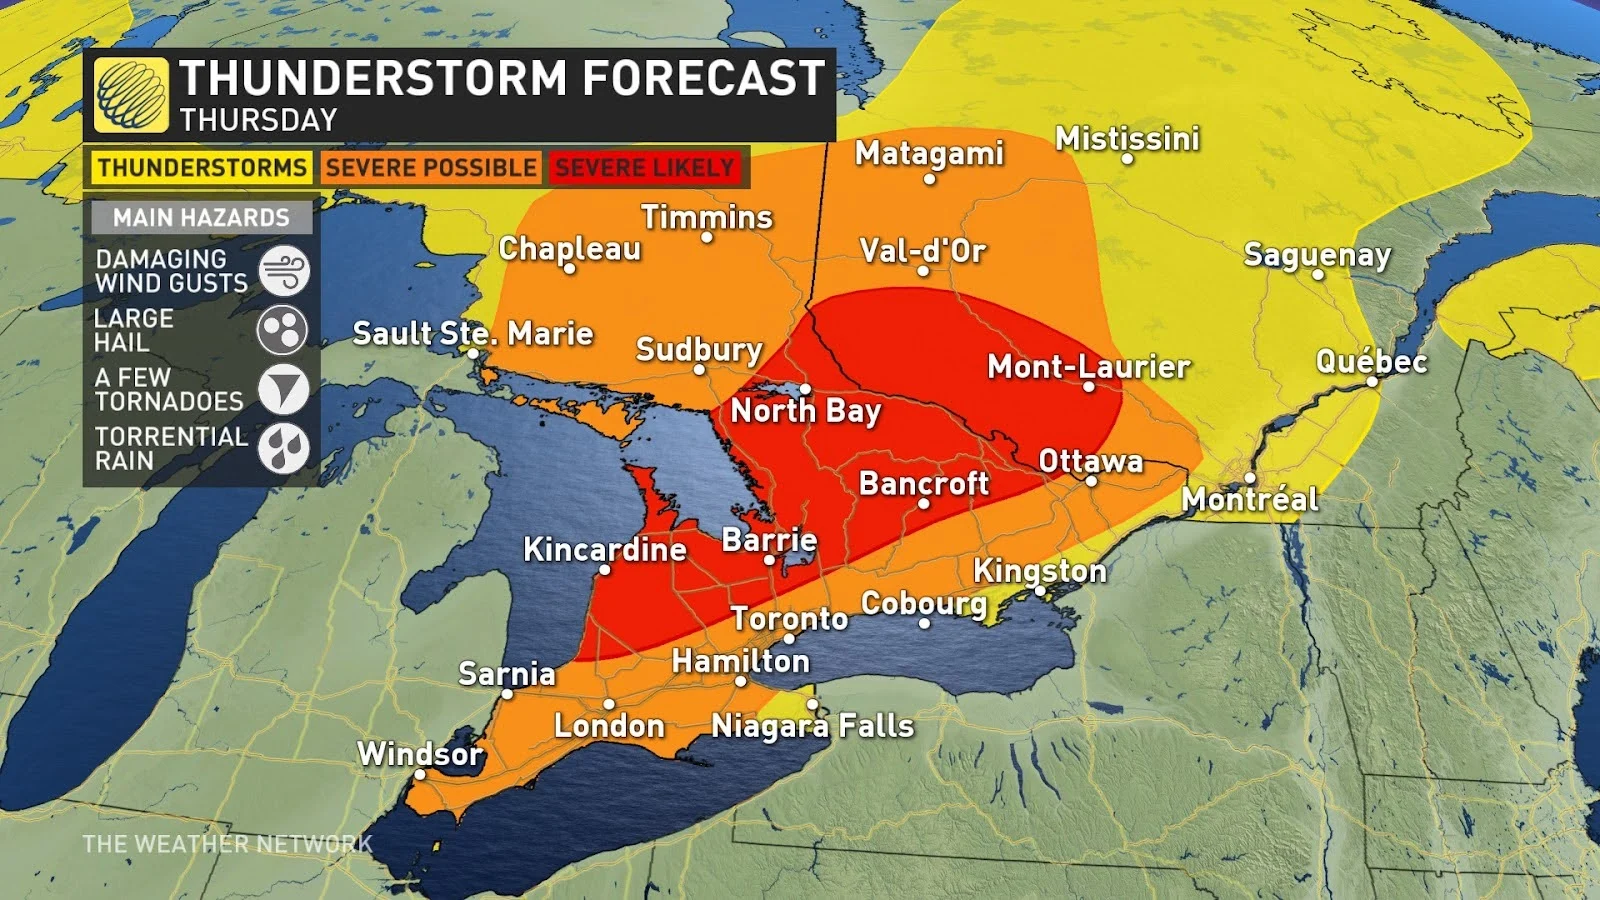 southern ontario storm risk June 13